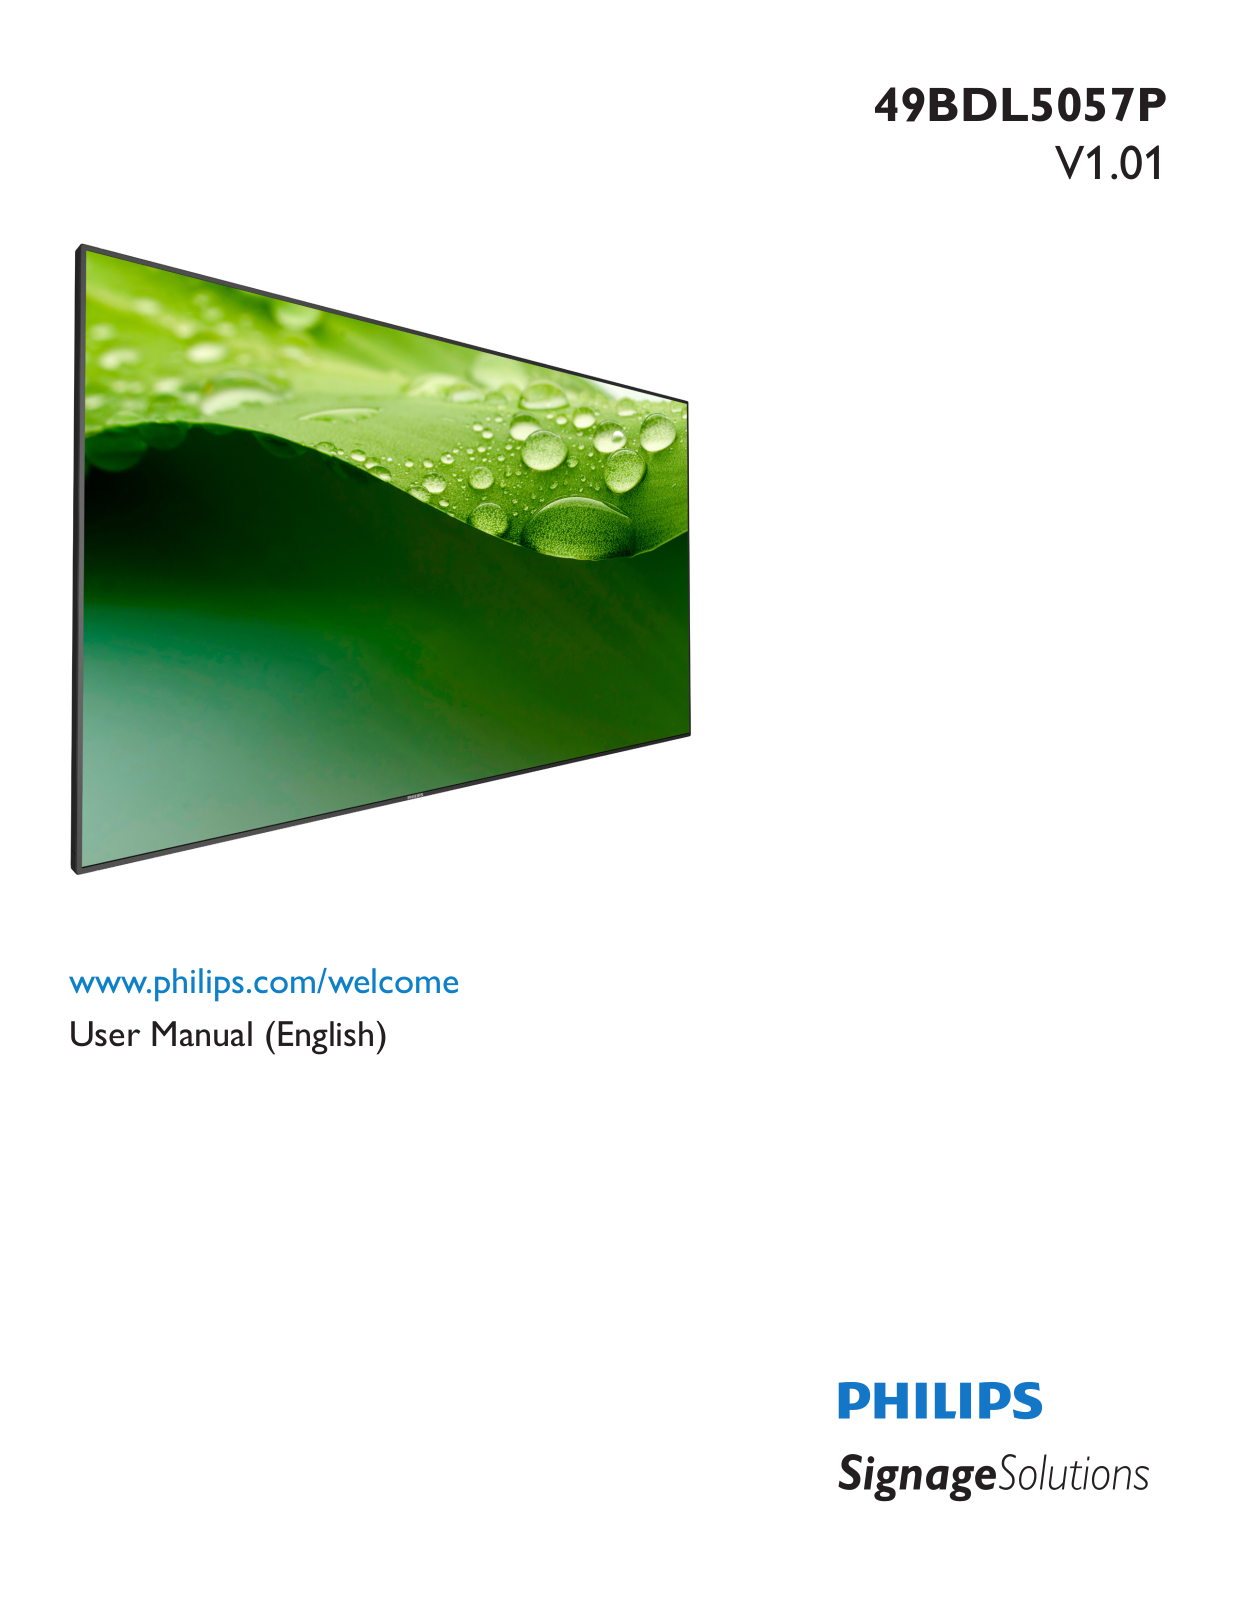 Philips 49BDL5057P User Guide